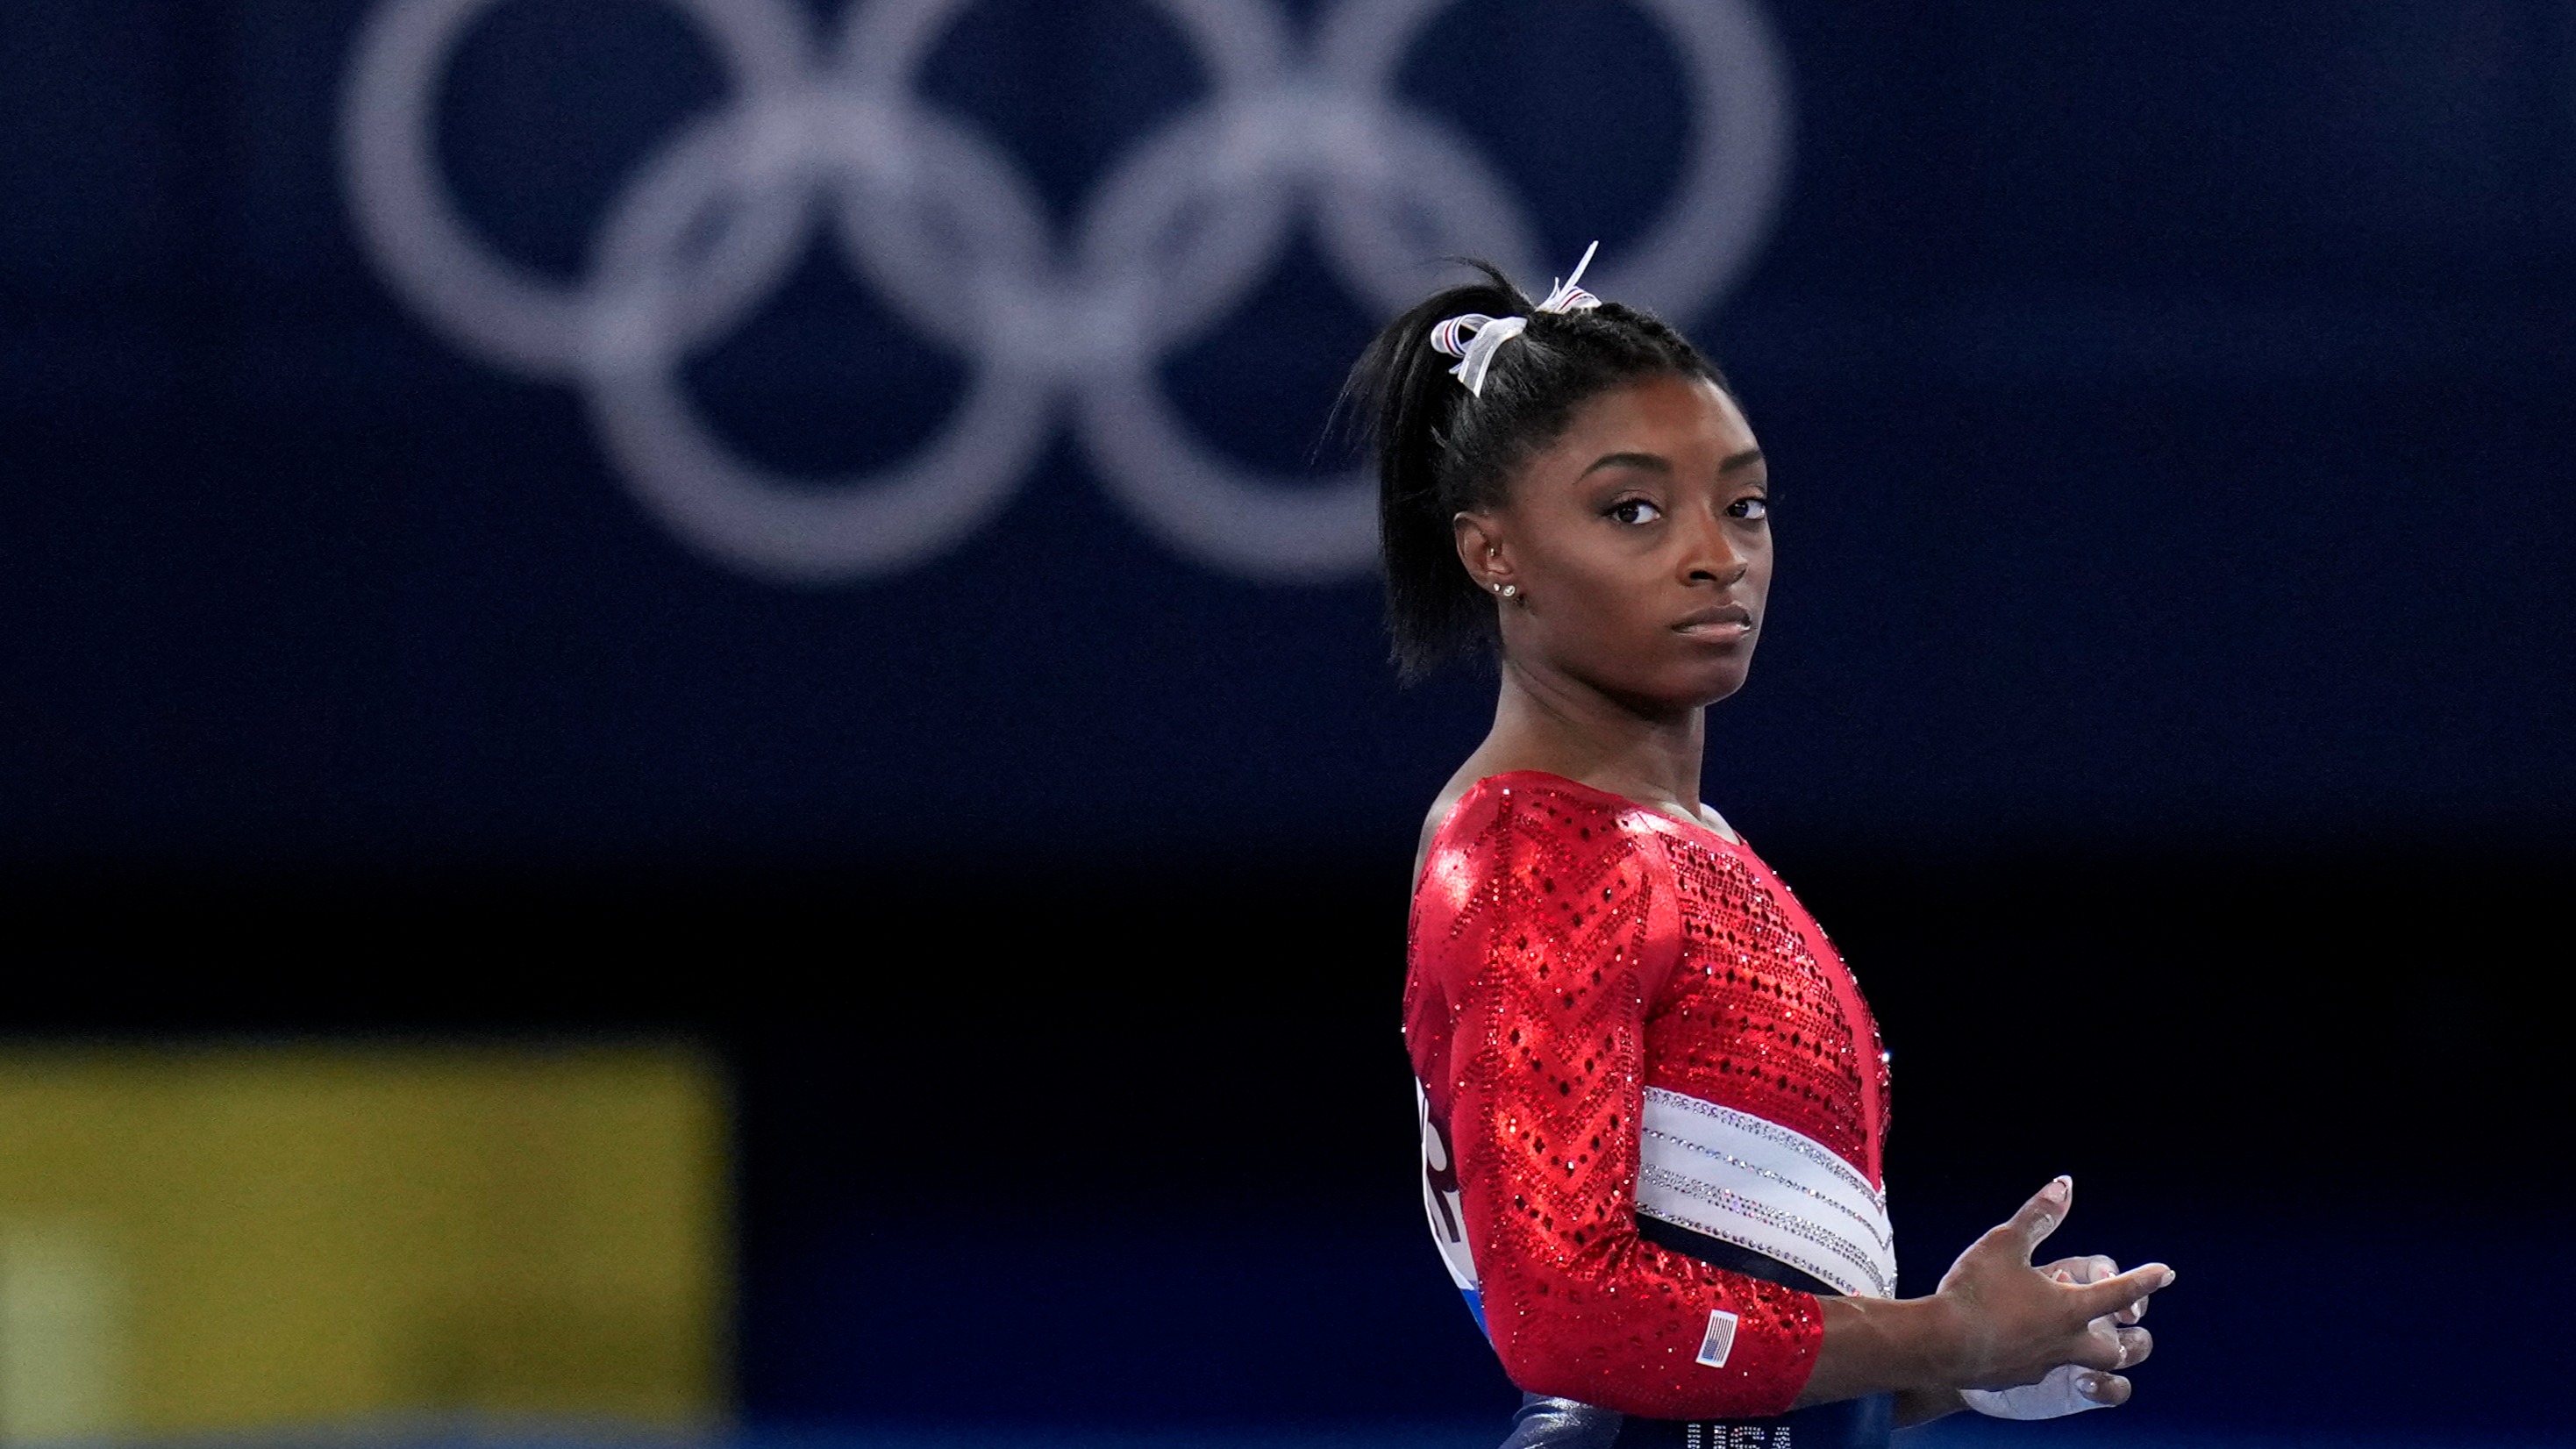 Simone Biles became first woman to land the Yurchenko double pike vault at  World Artistic Gymnastics Championships - ABC7 New York